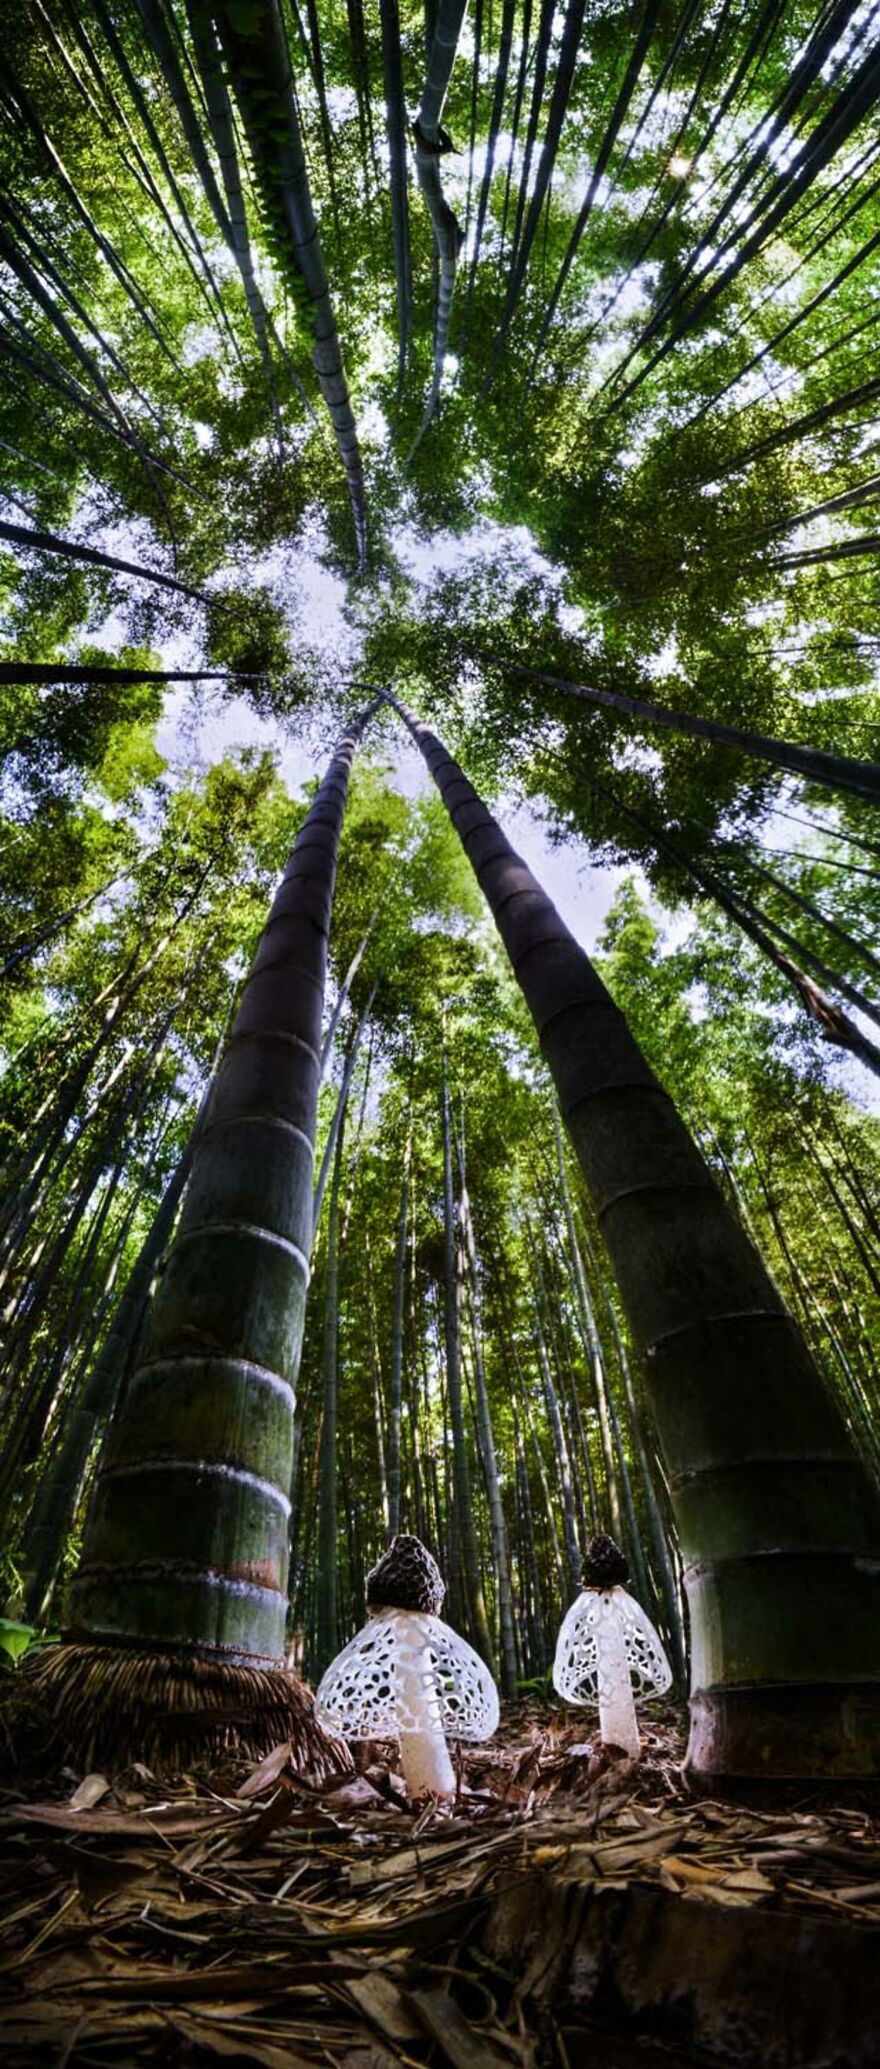 Category Plants And Fungi: "Spirits Of The Bamboo Forest" By Agorastos Papatsanis (Gr)